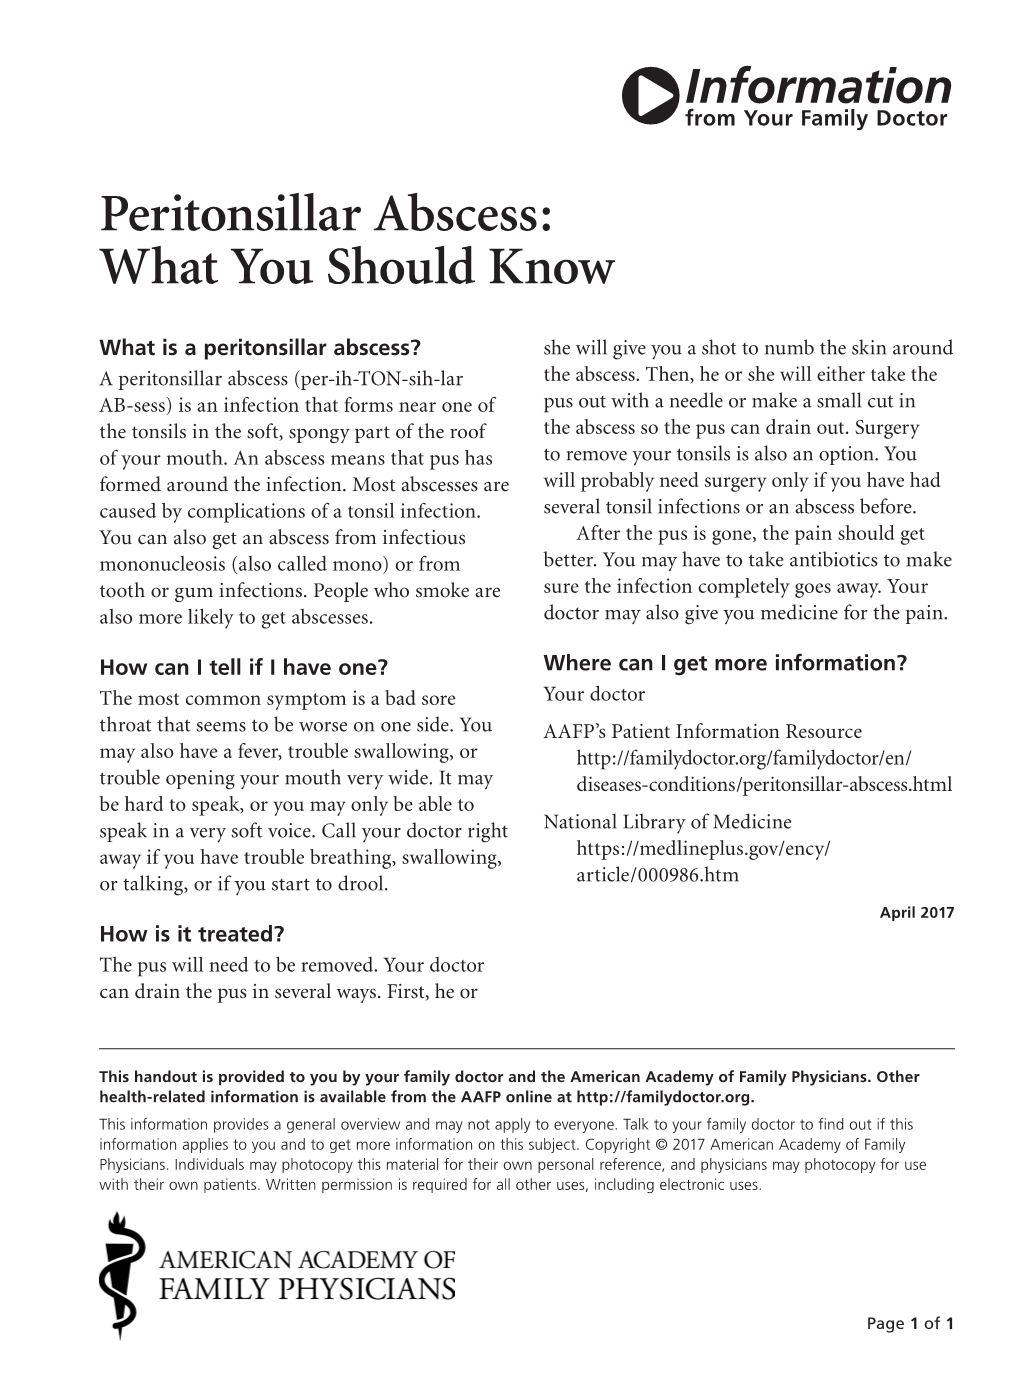 Peritonsillar Abscess: What You Should Know